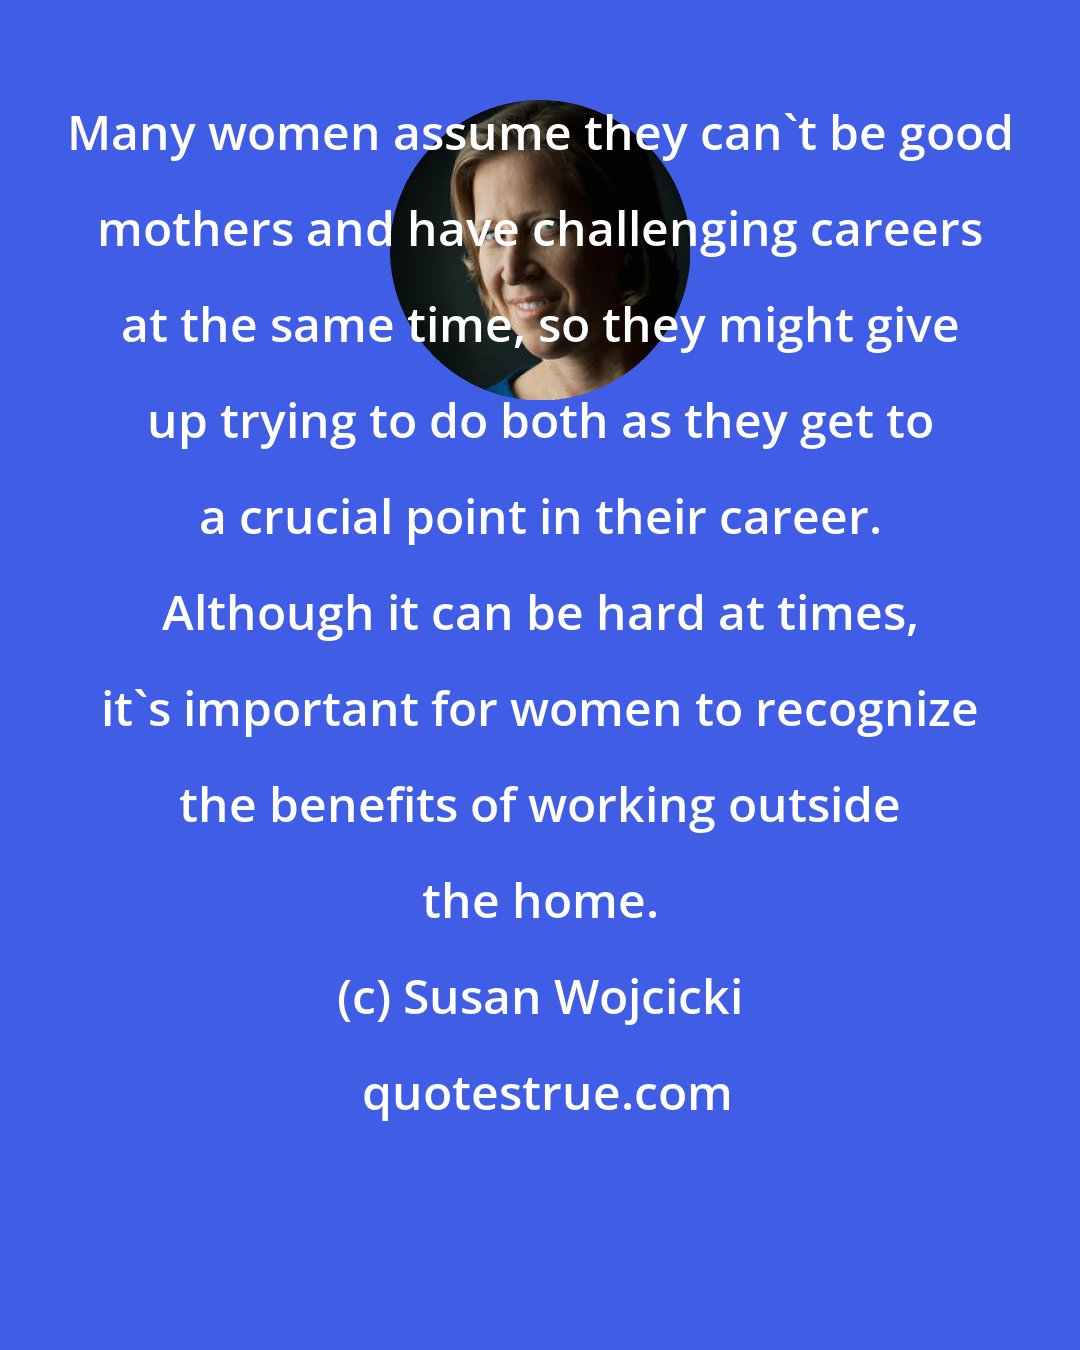 Susan Wojcicki: Many women assume they can't be good mothers and have challenging careers at the same time, so they might give up trying to do both as they get to a crucial point in their career. Although it can be hard at times, it's important for women to recognize the benefits of working outside the home.